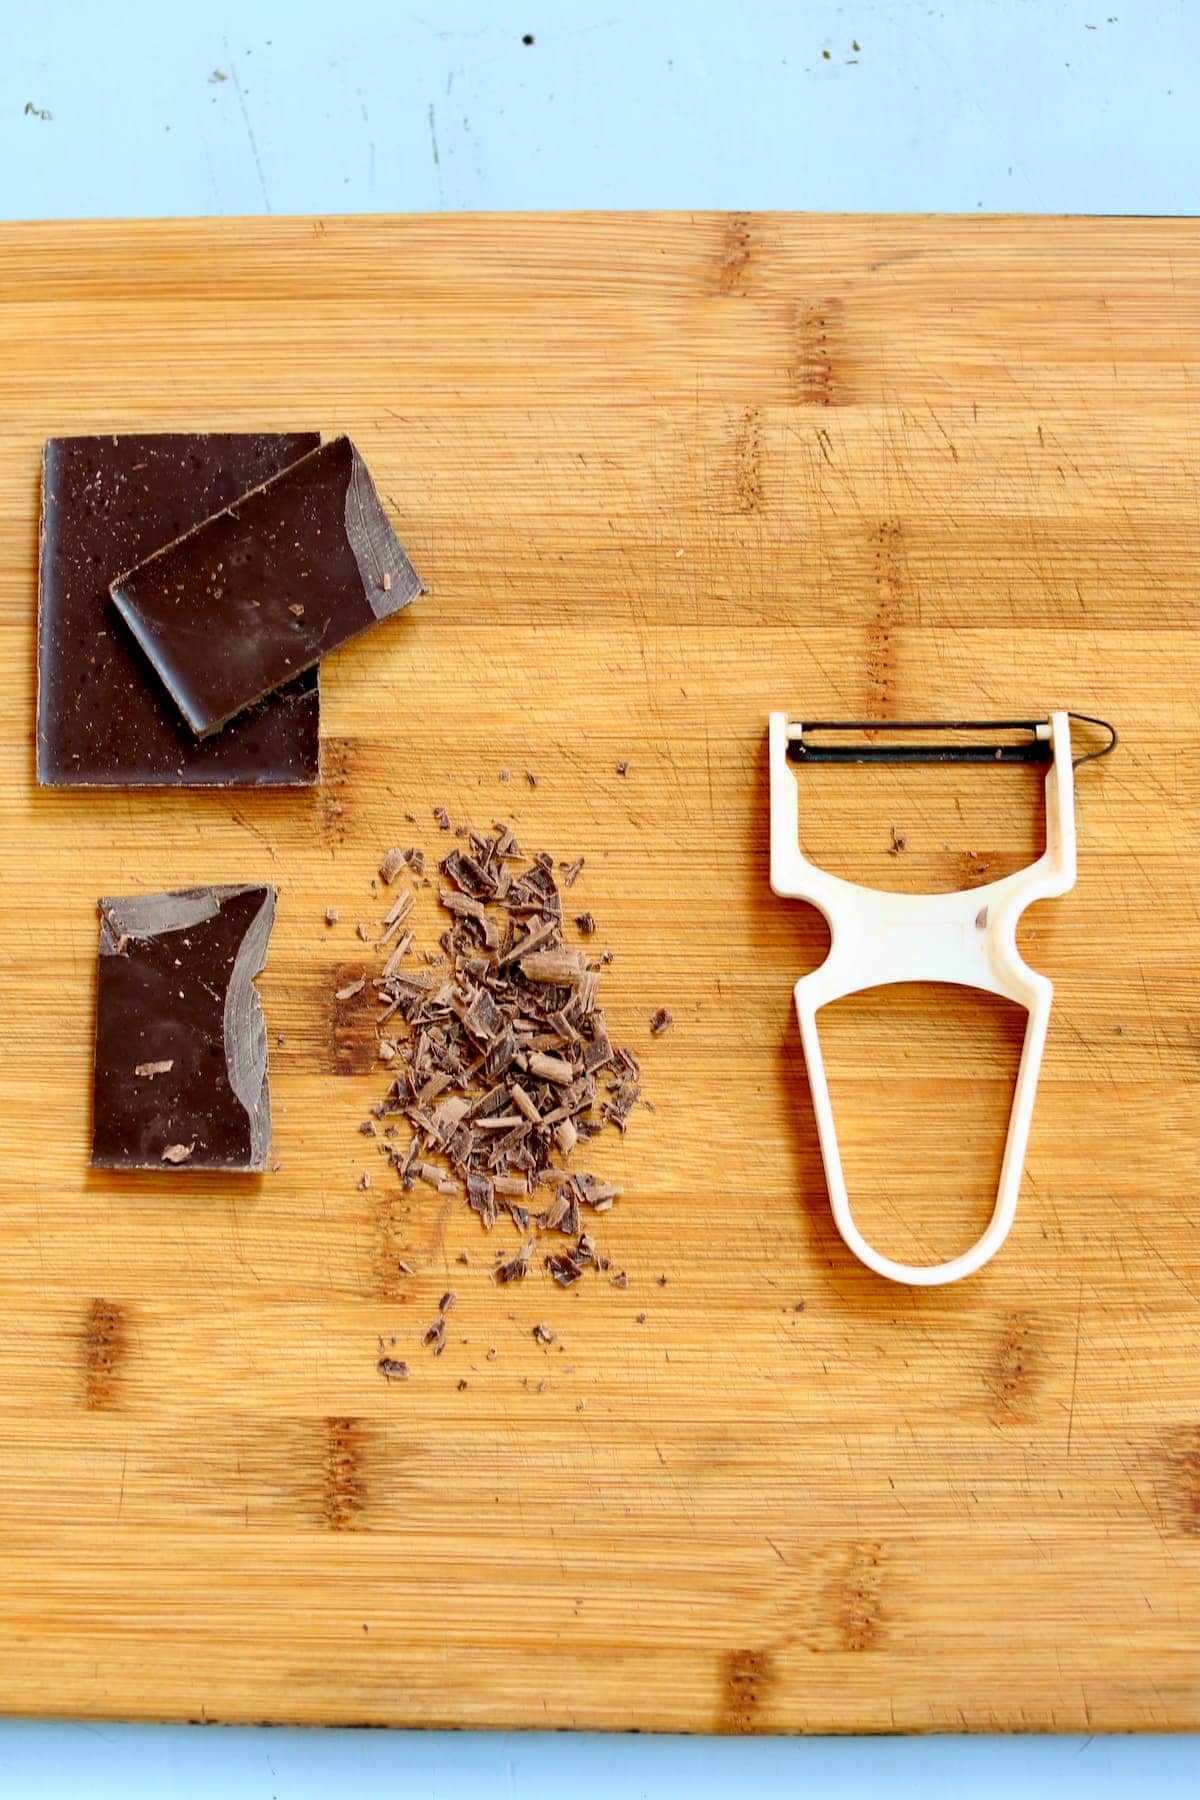 a wooden cutting board with chocolate and a vegetable peeler.